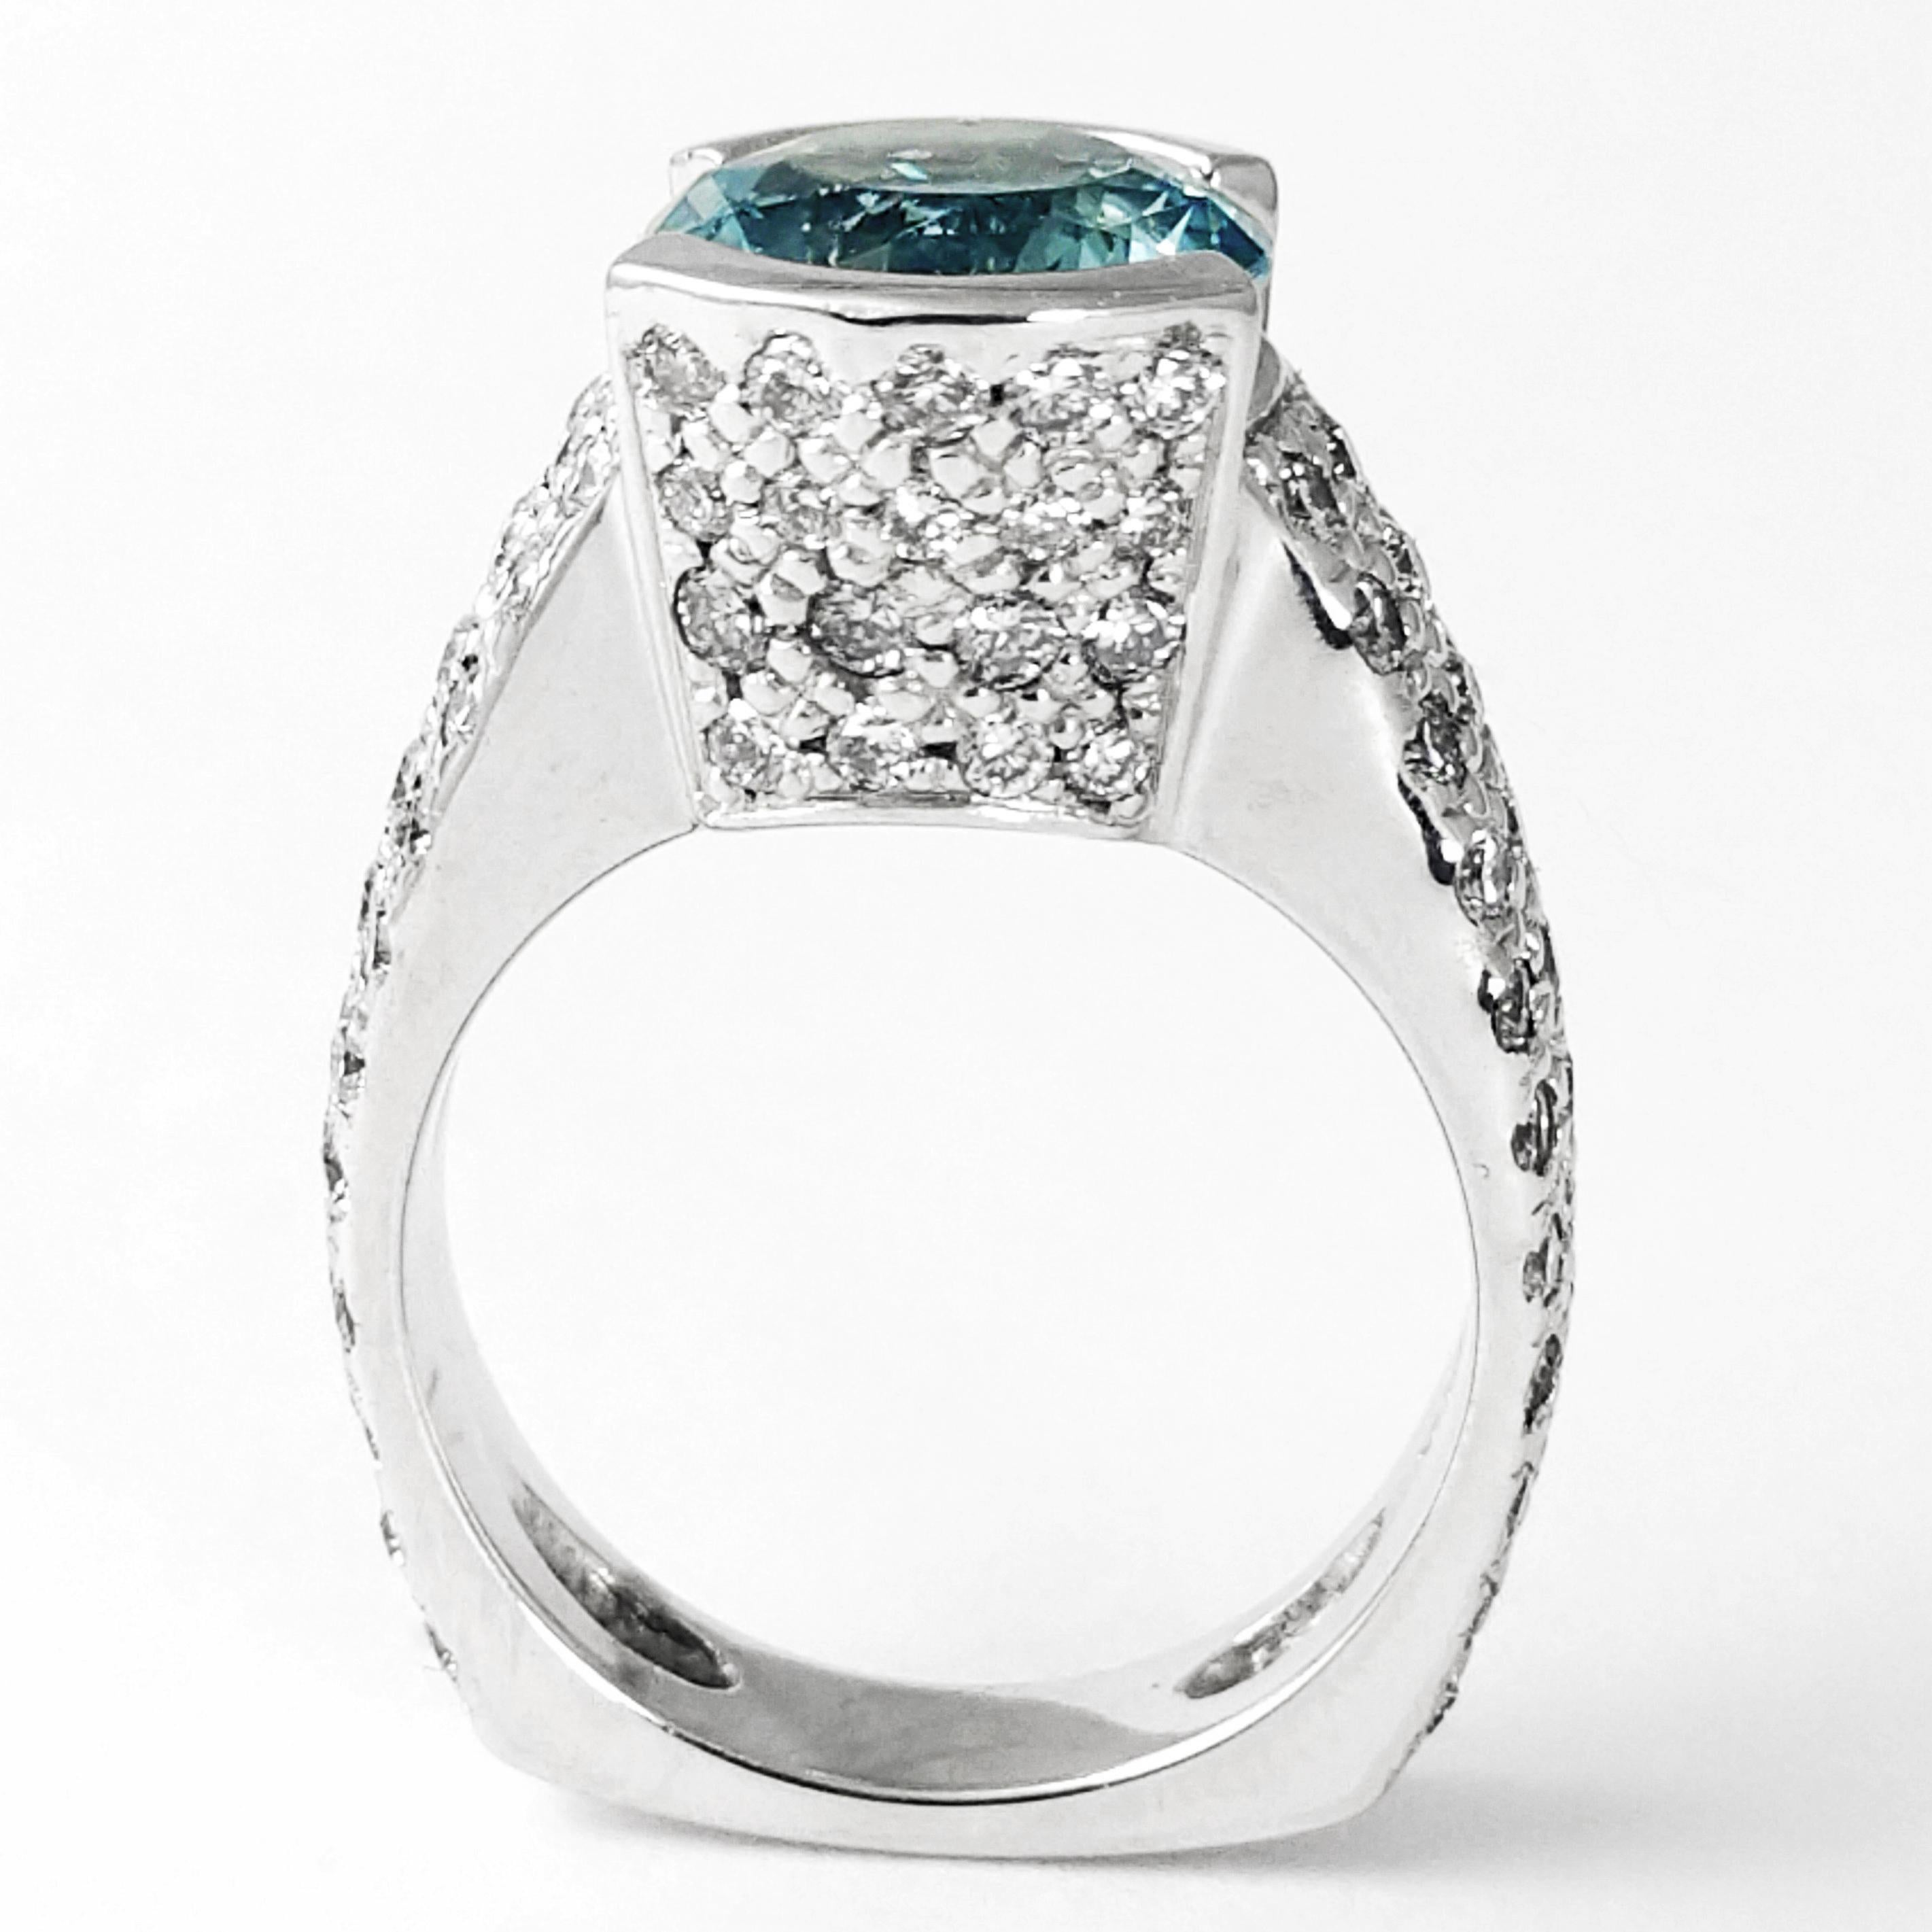 Women's 2.75 Carat Round Aquamarine and Pave Diamond Ring Classic Contemporary Fashion For Sale